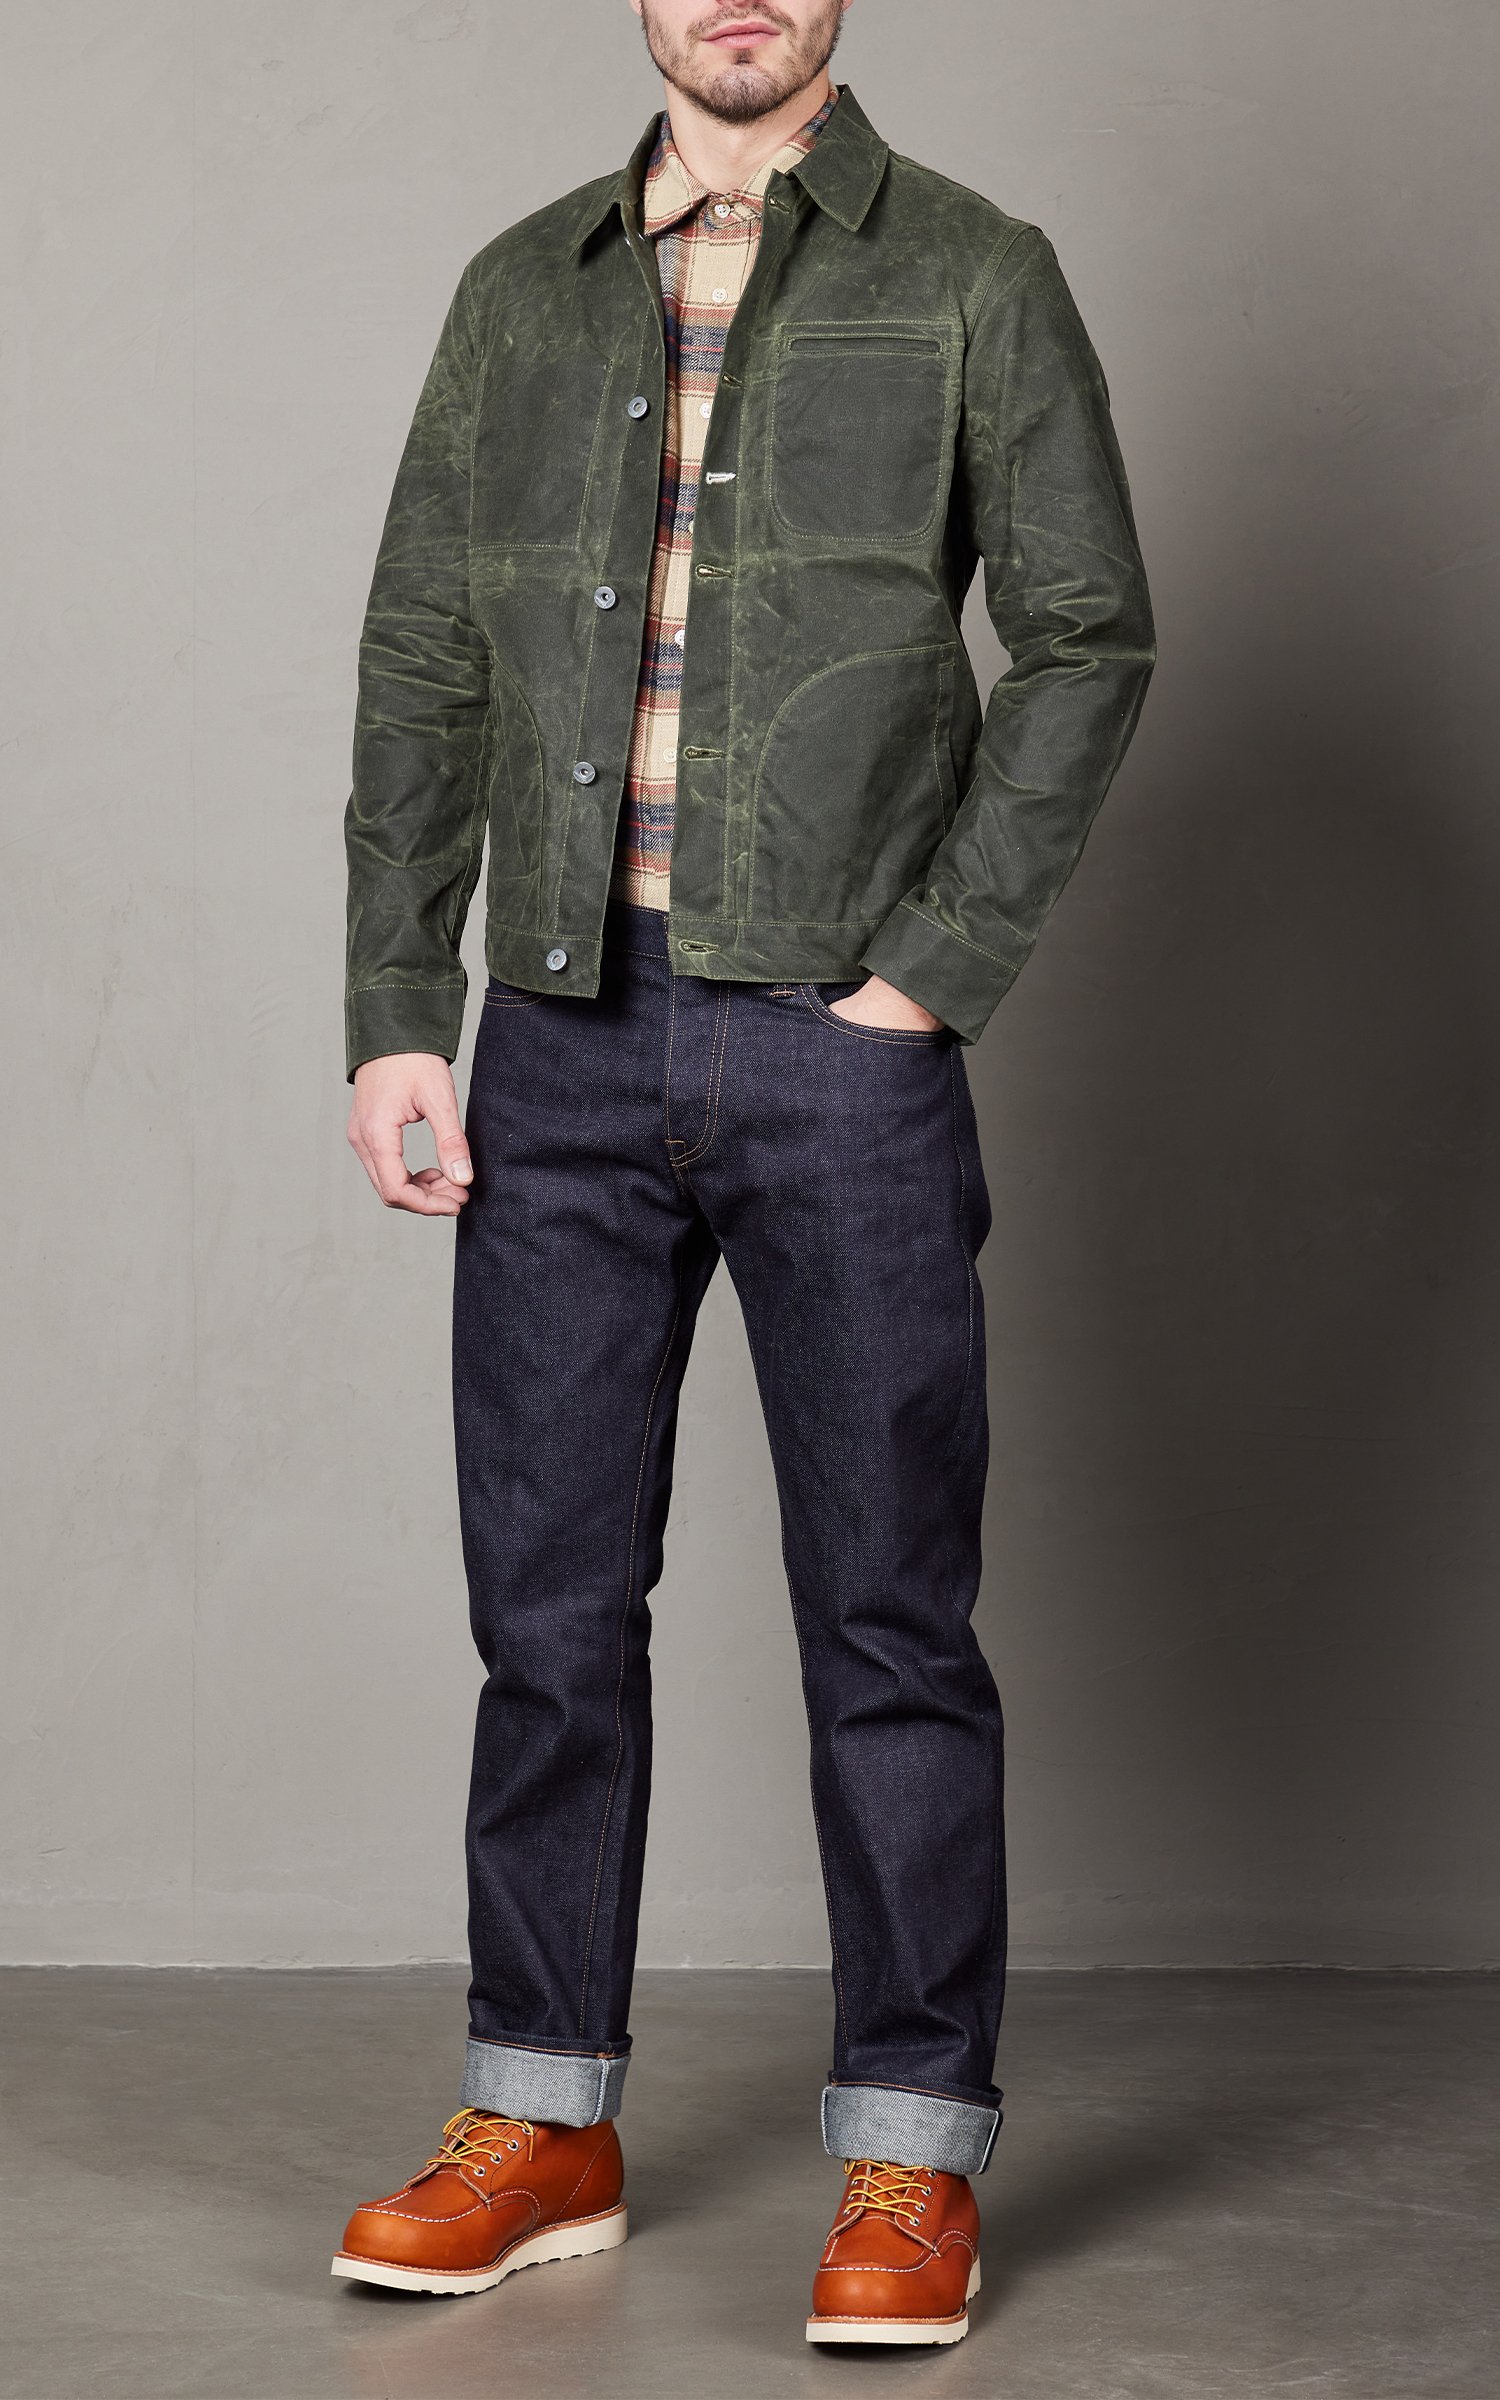 Rogue Territory Supply Jacket Waxed Canvas Ridgeline Olive | Cultizm